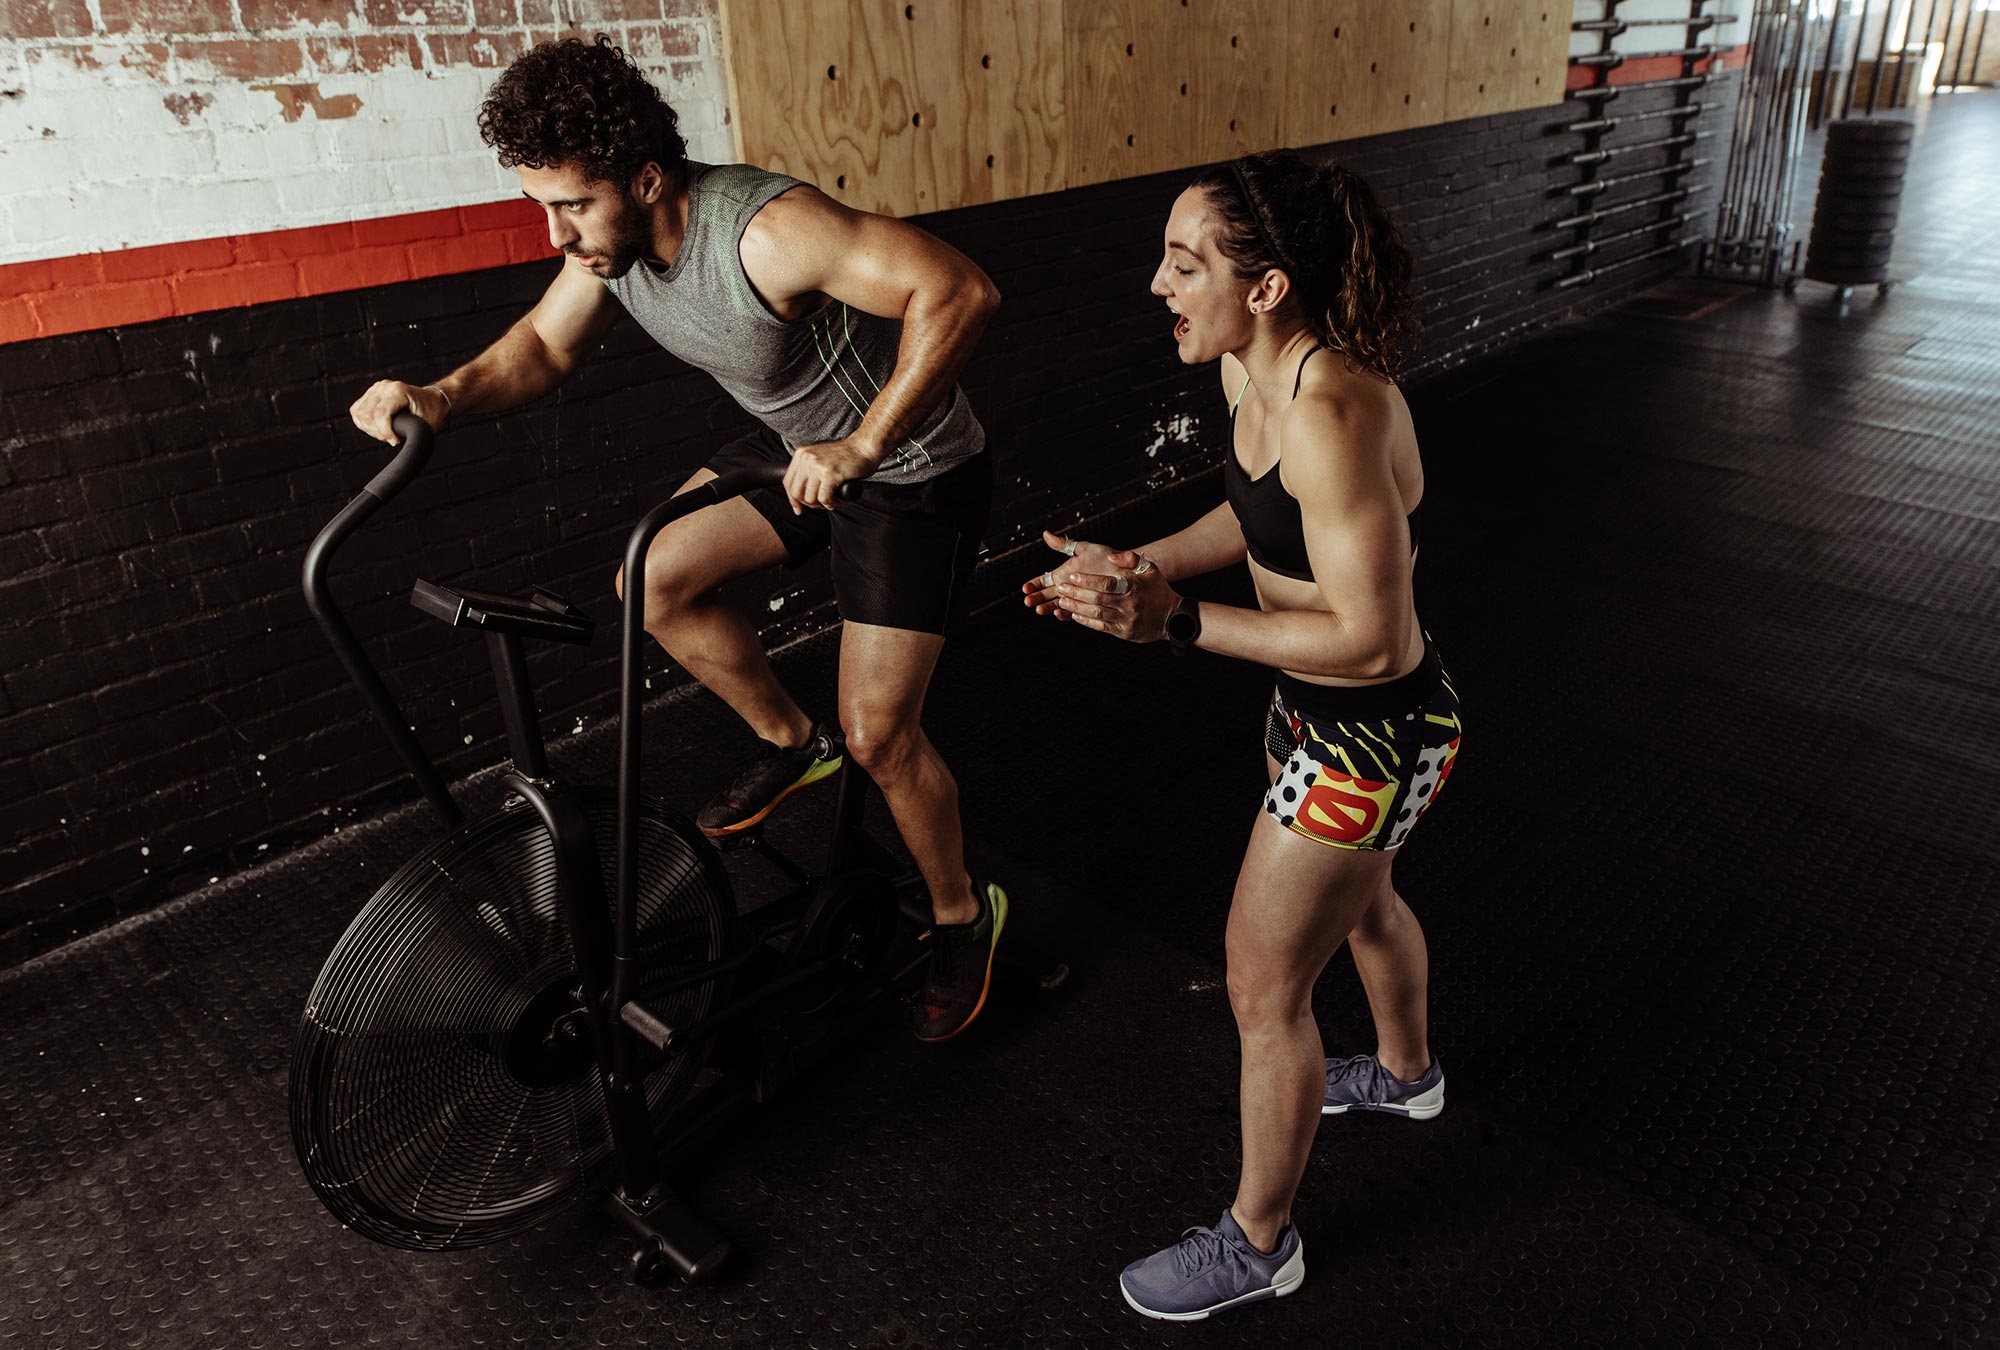  A man and woman are exercising in a gym. The man is on an exercise bike and the woman is standing next to him, clapping and cheering him on. The image represents the search query 'Tips for maintaining motivation in exercise'.